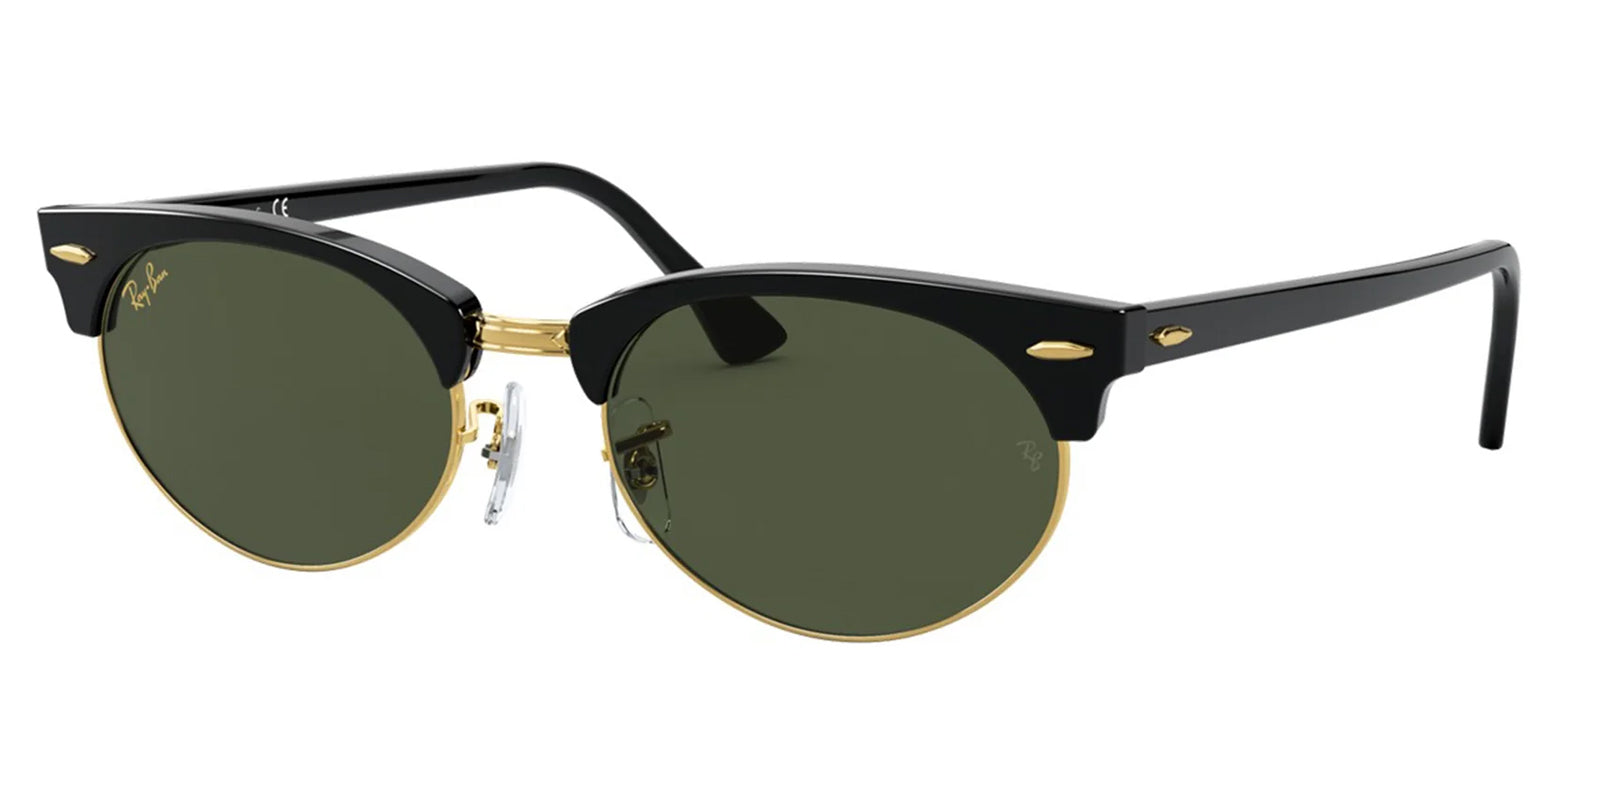 Ray-Ban Clubmaster Oval Adult Lifestyle Sunglasses